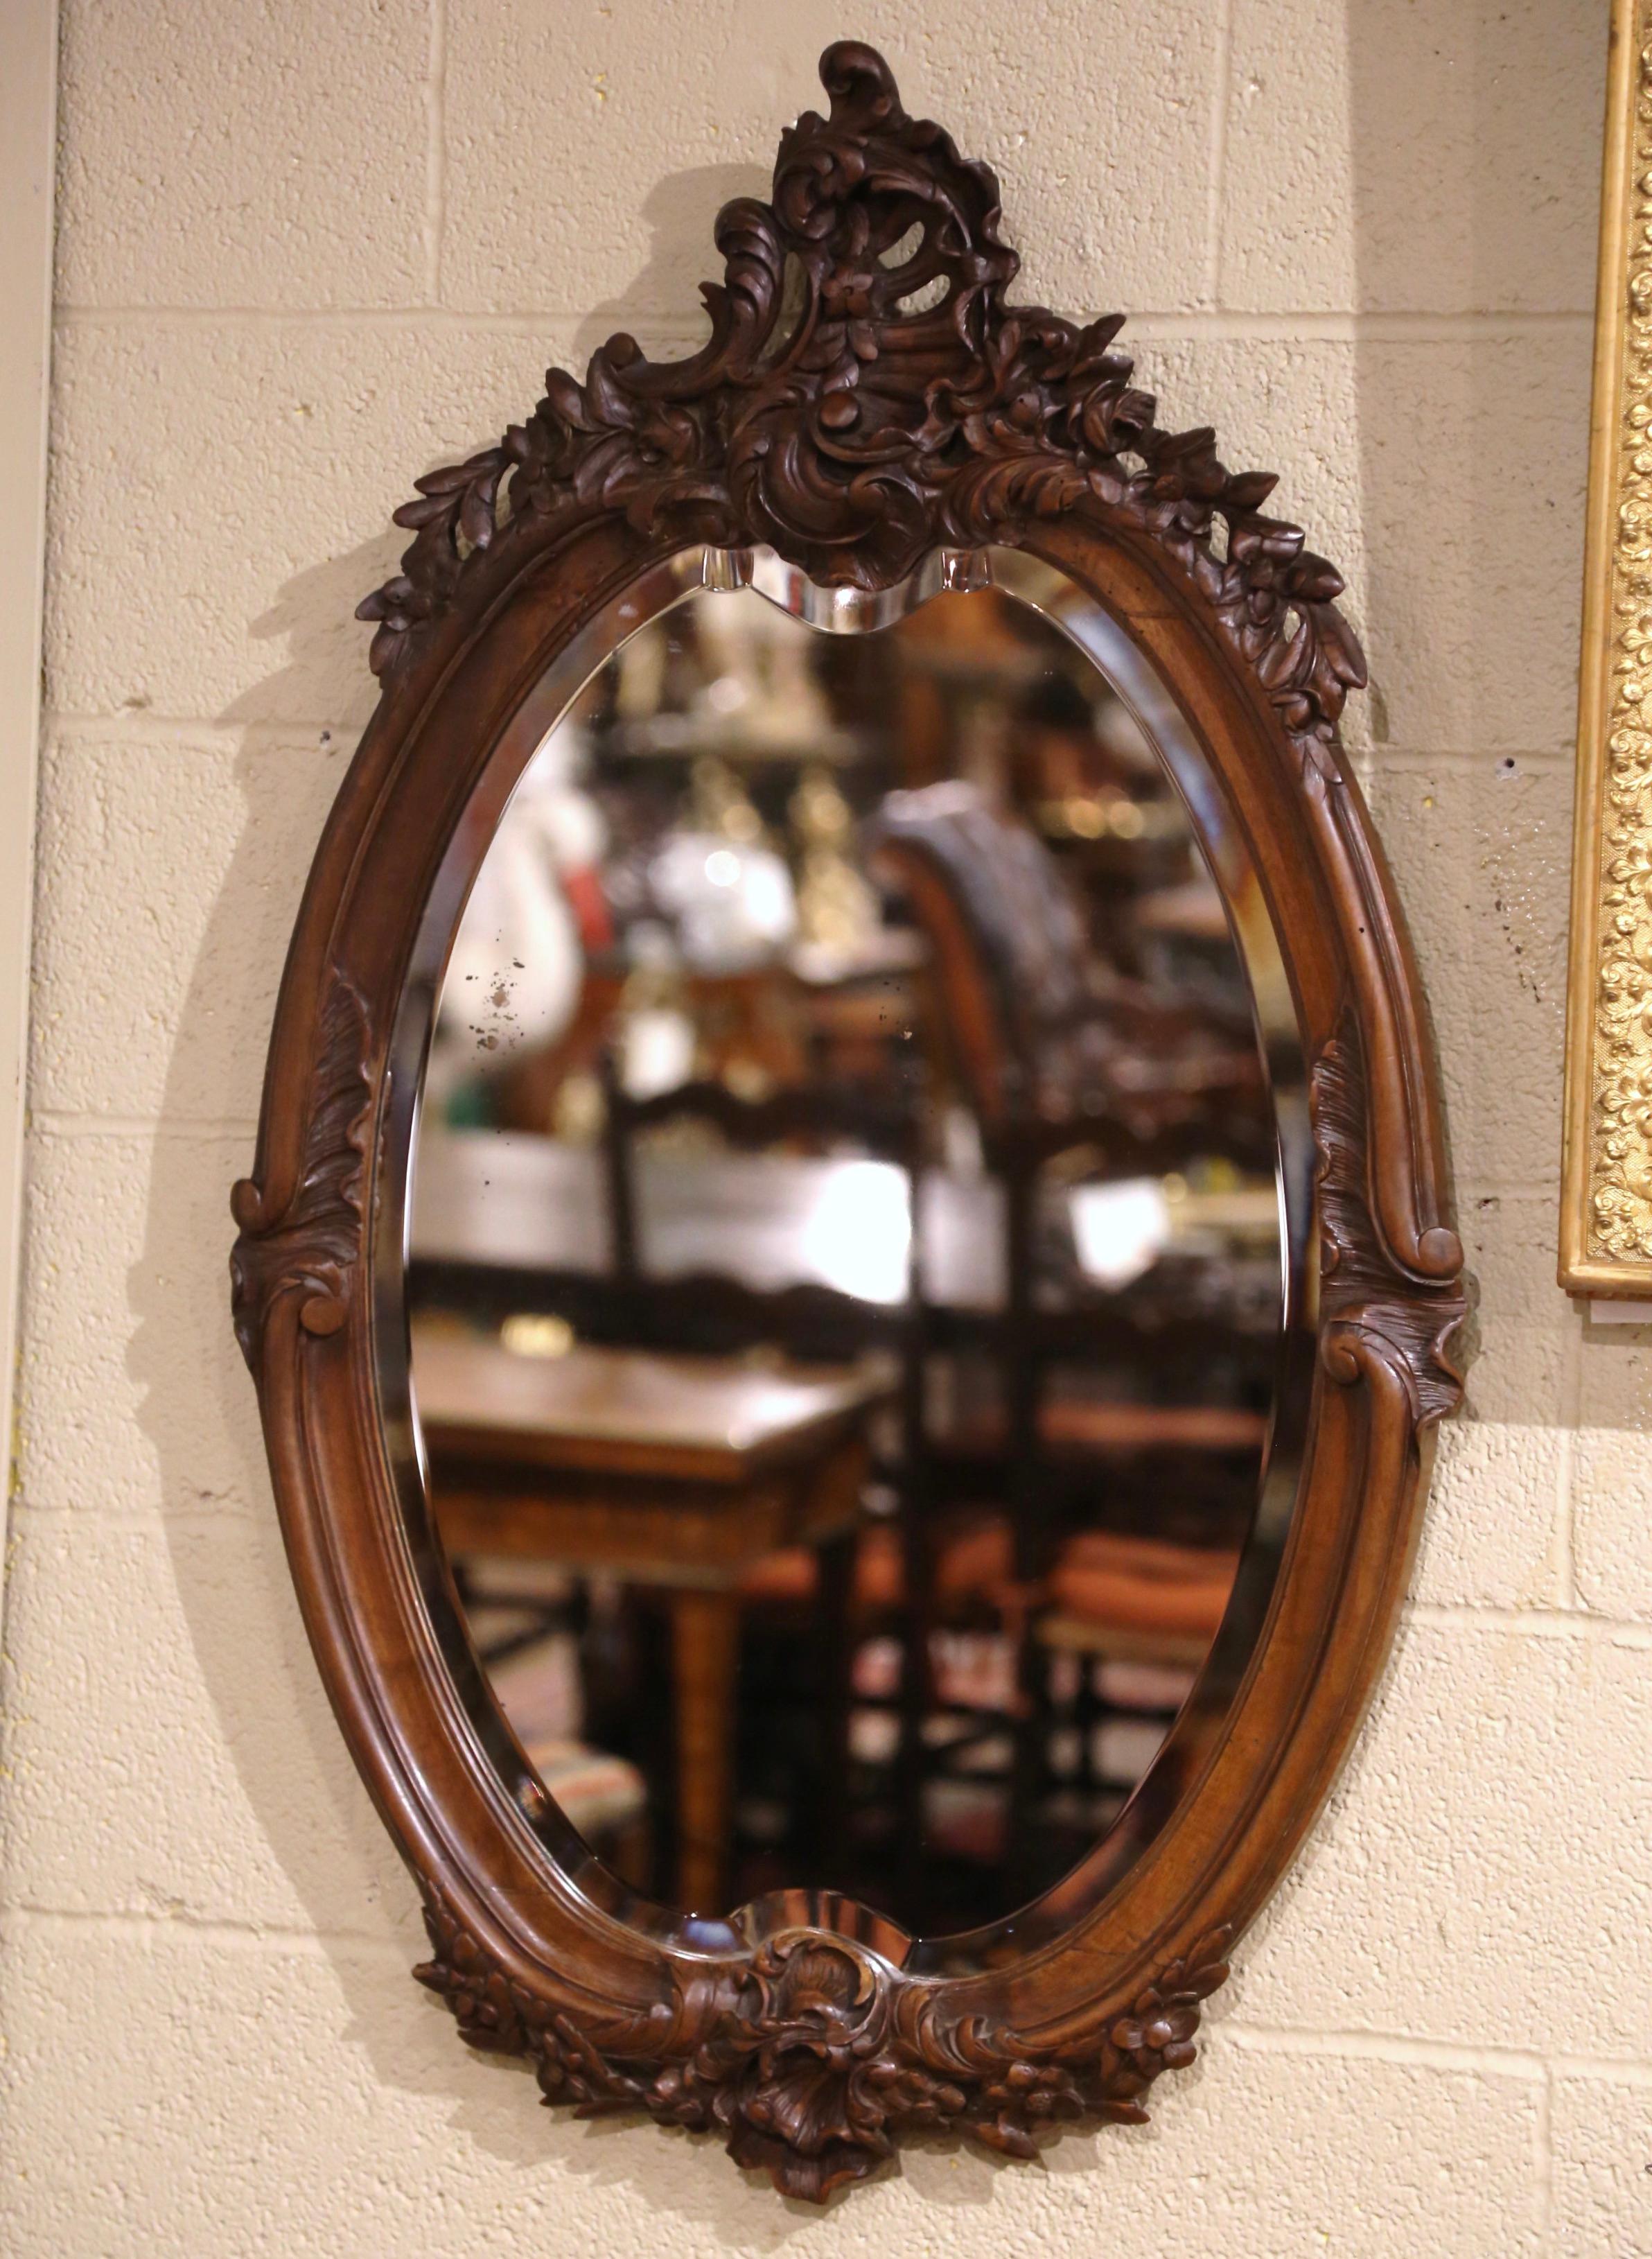 This large antique wall mirror was crafted in France, circa 1870. Oval in shape, the important mirror features hand carved motifs including a large hand carved and pieced cartouche shell motif at the pediment, embellished with foliage, floral decor